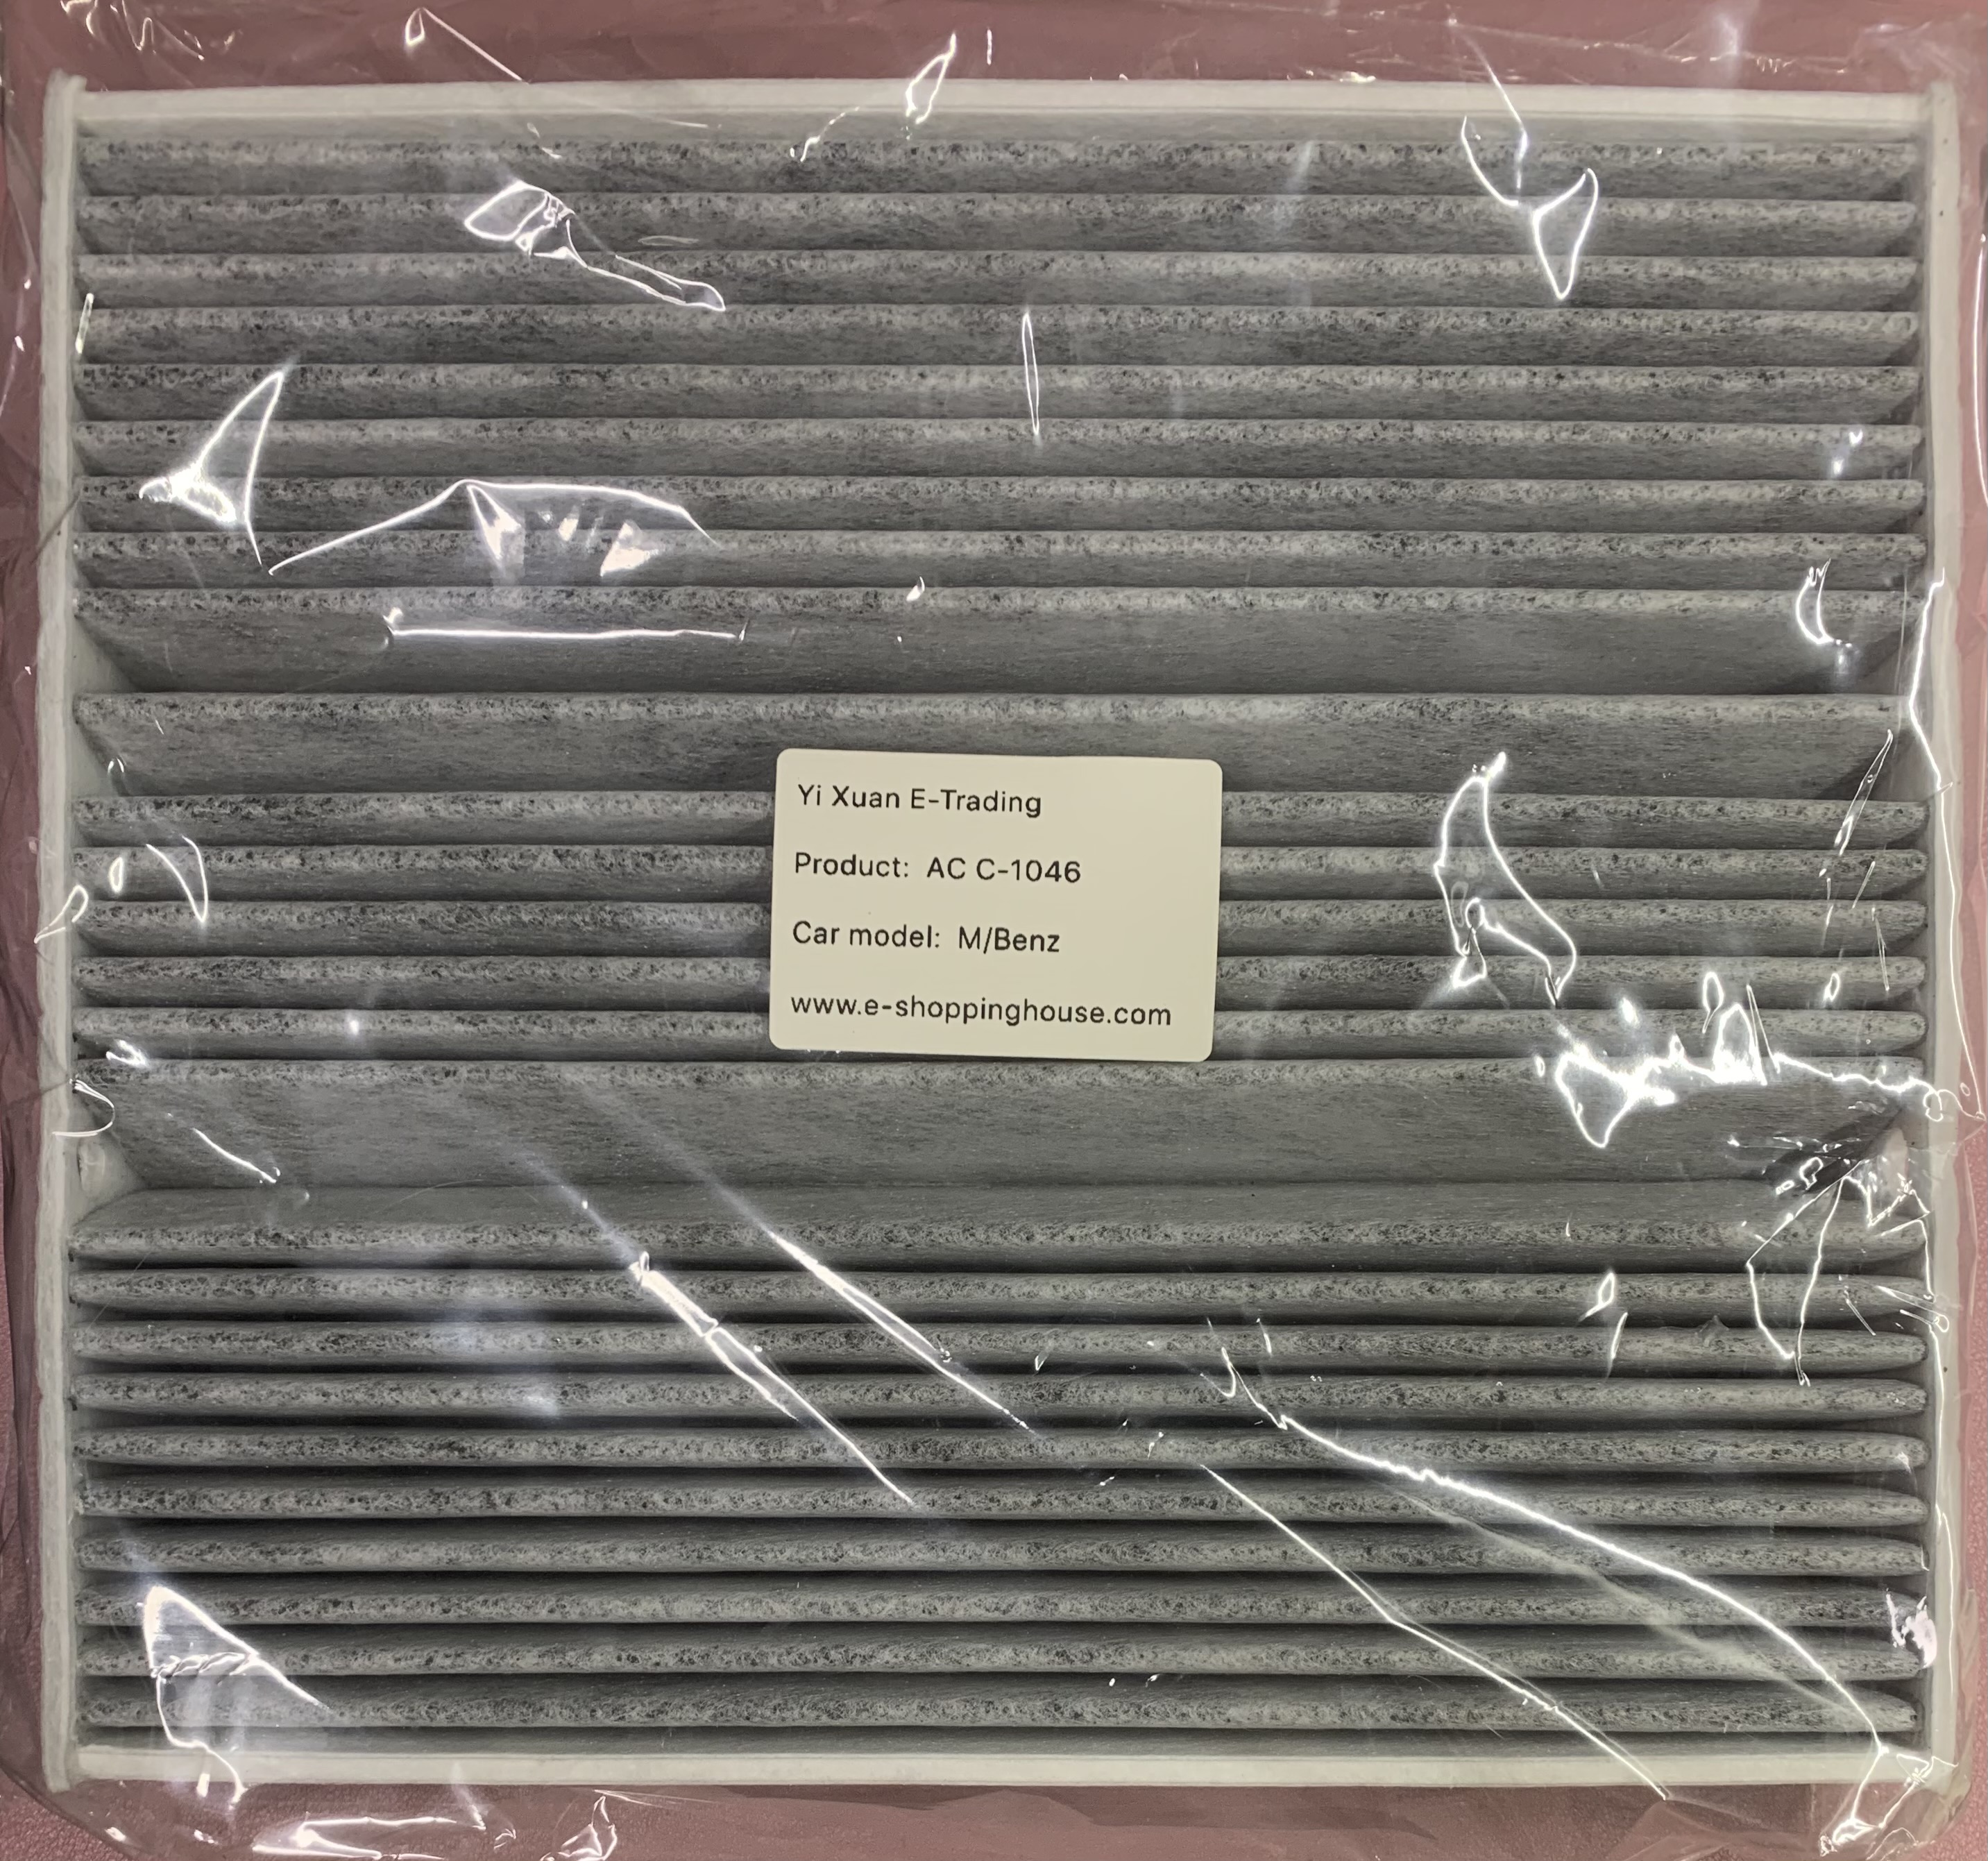 A180 W177 1.5 OM608915 Carbon Aircon Filter